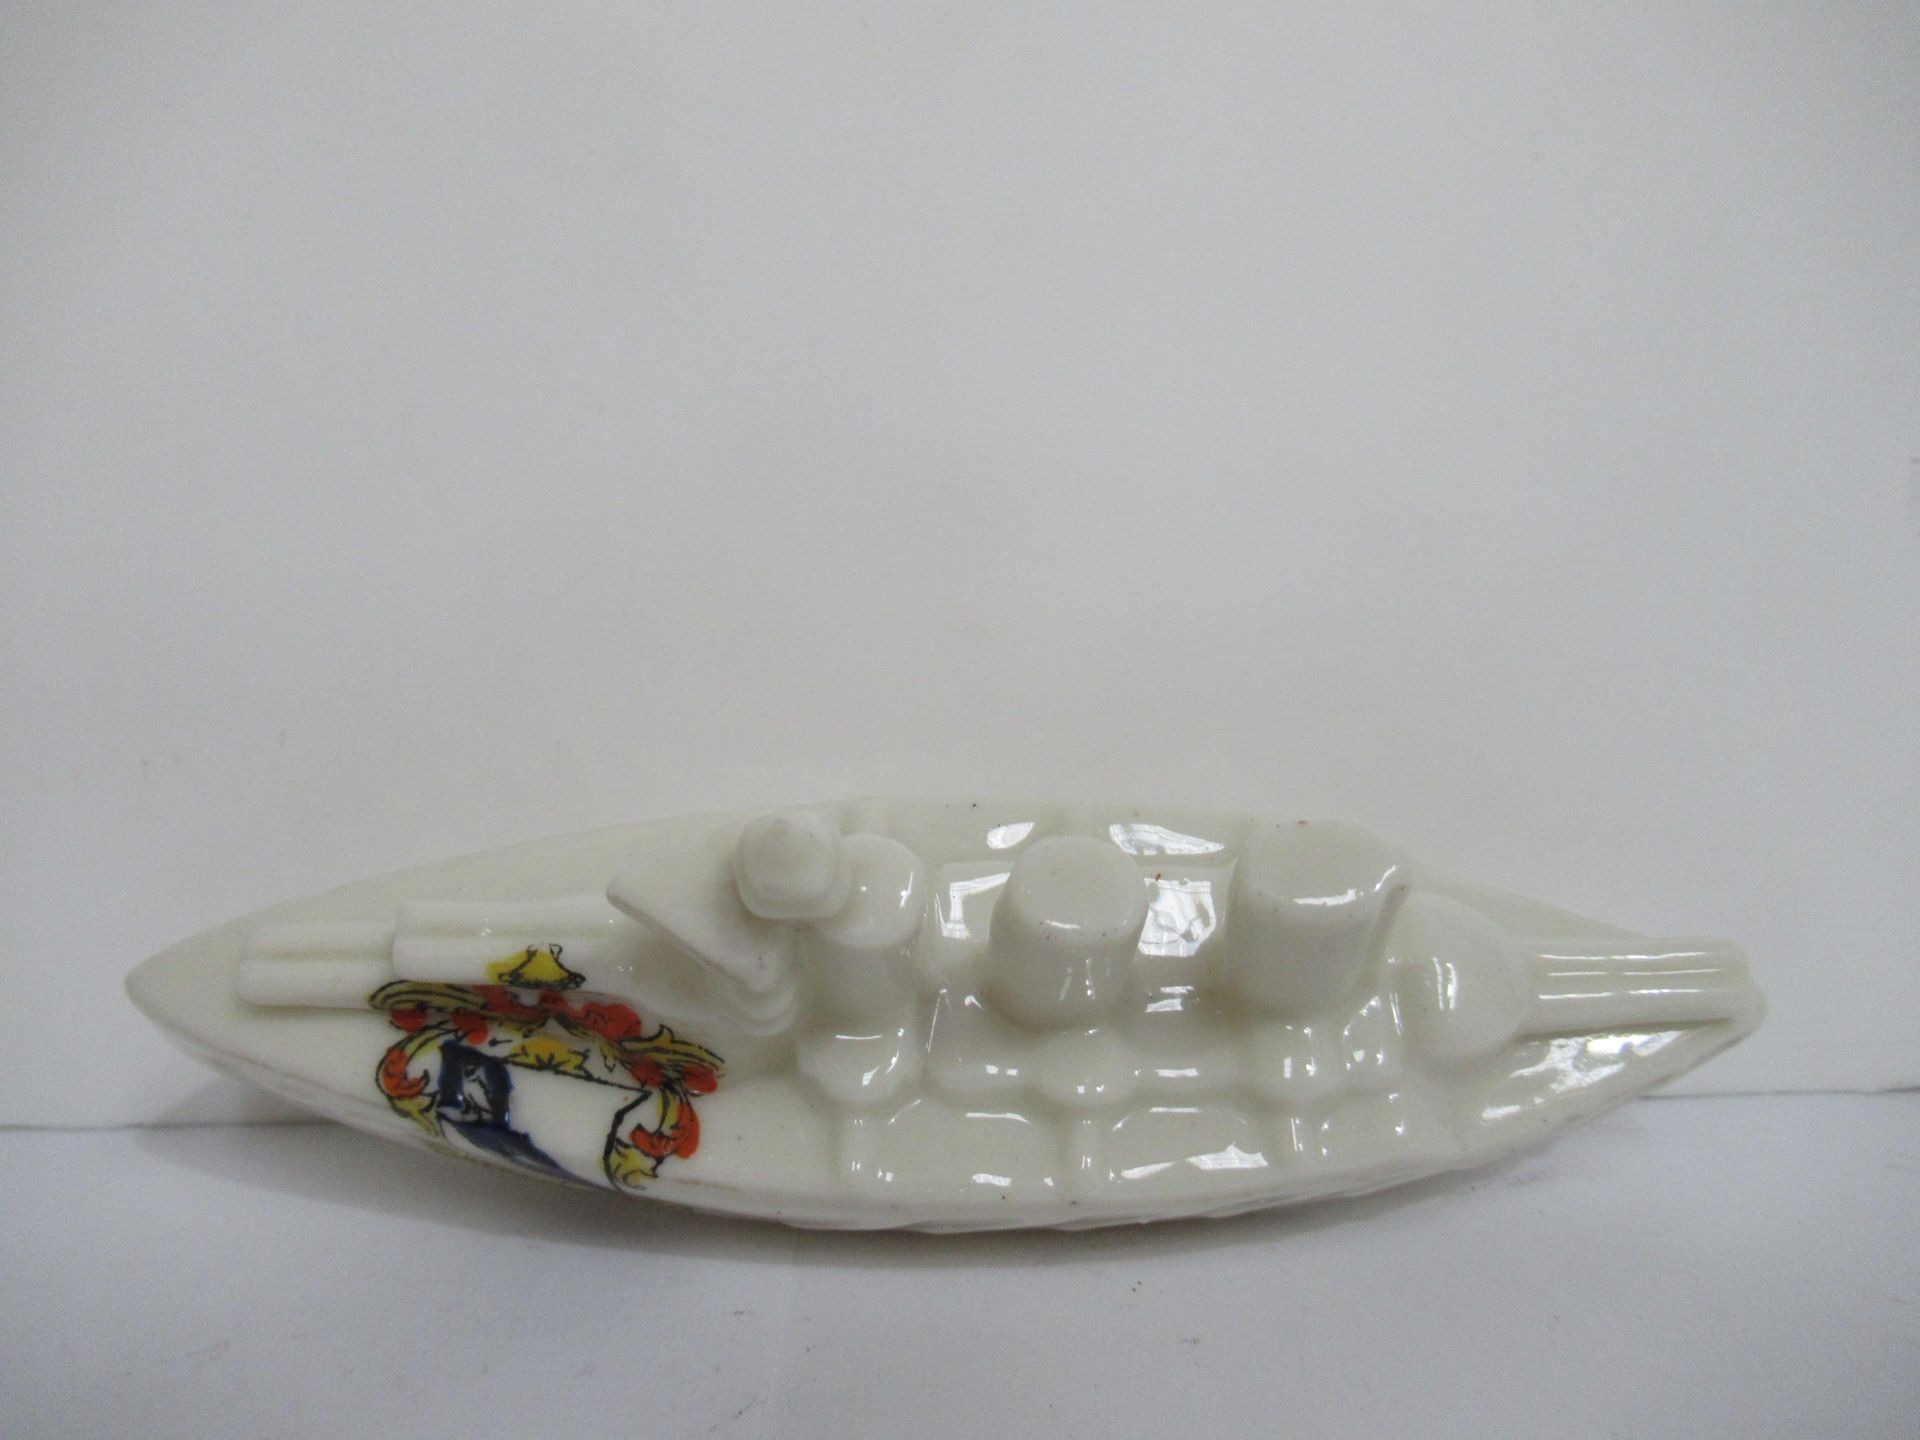 Crested China model of battleship with Cleethorpes coat of arms (120mm x 65mm) - Image 5 of 8